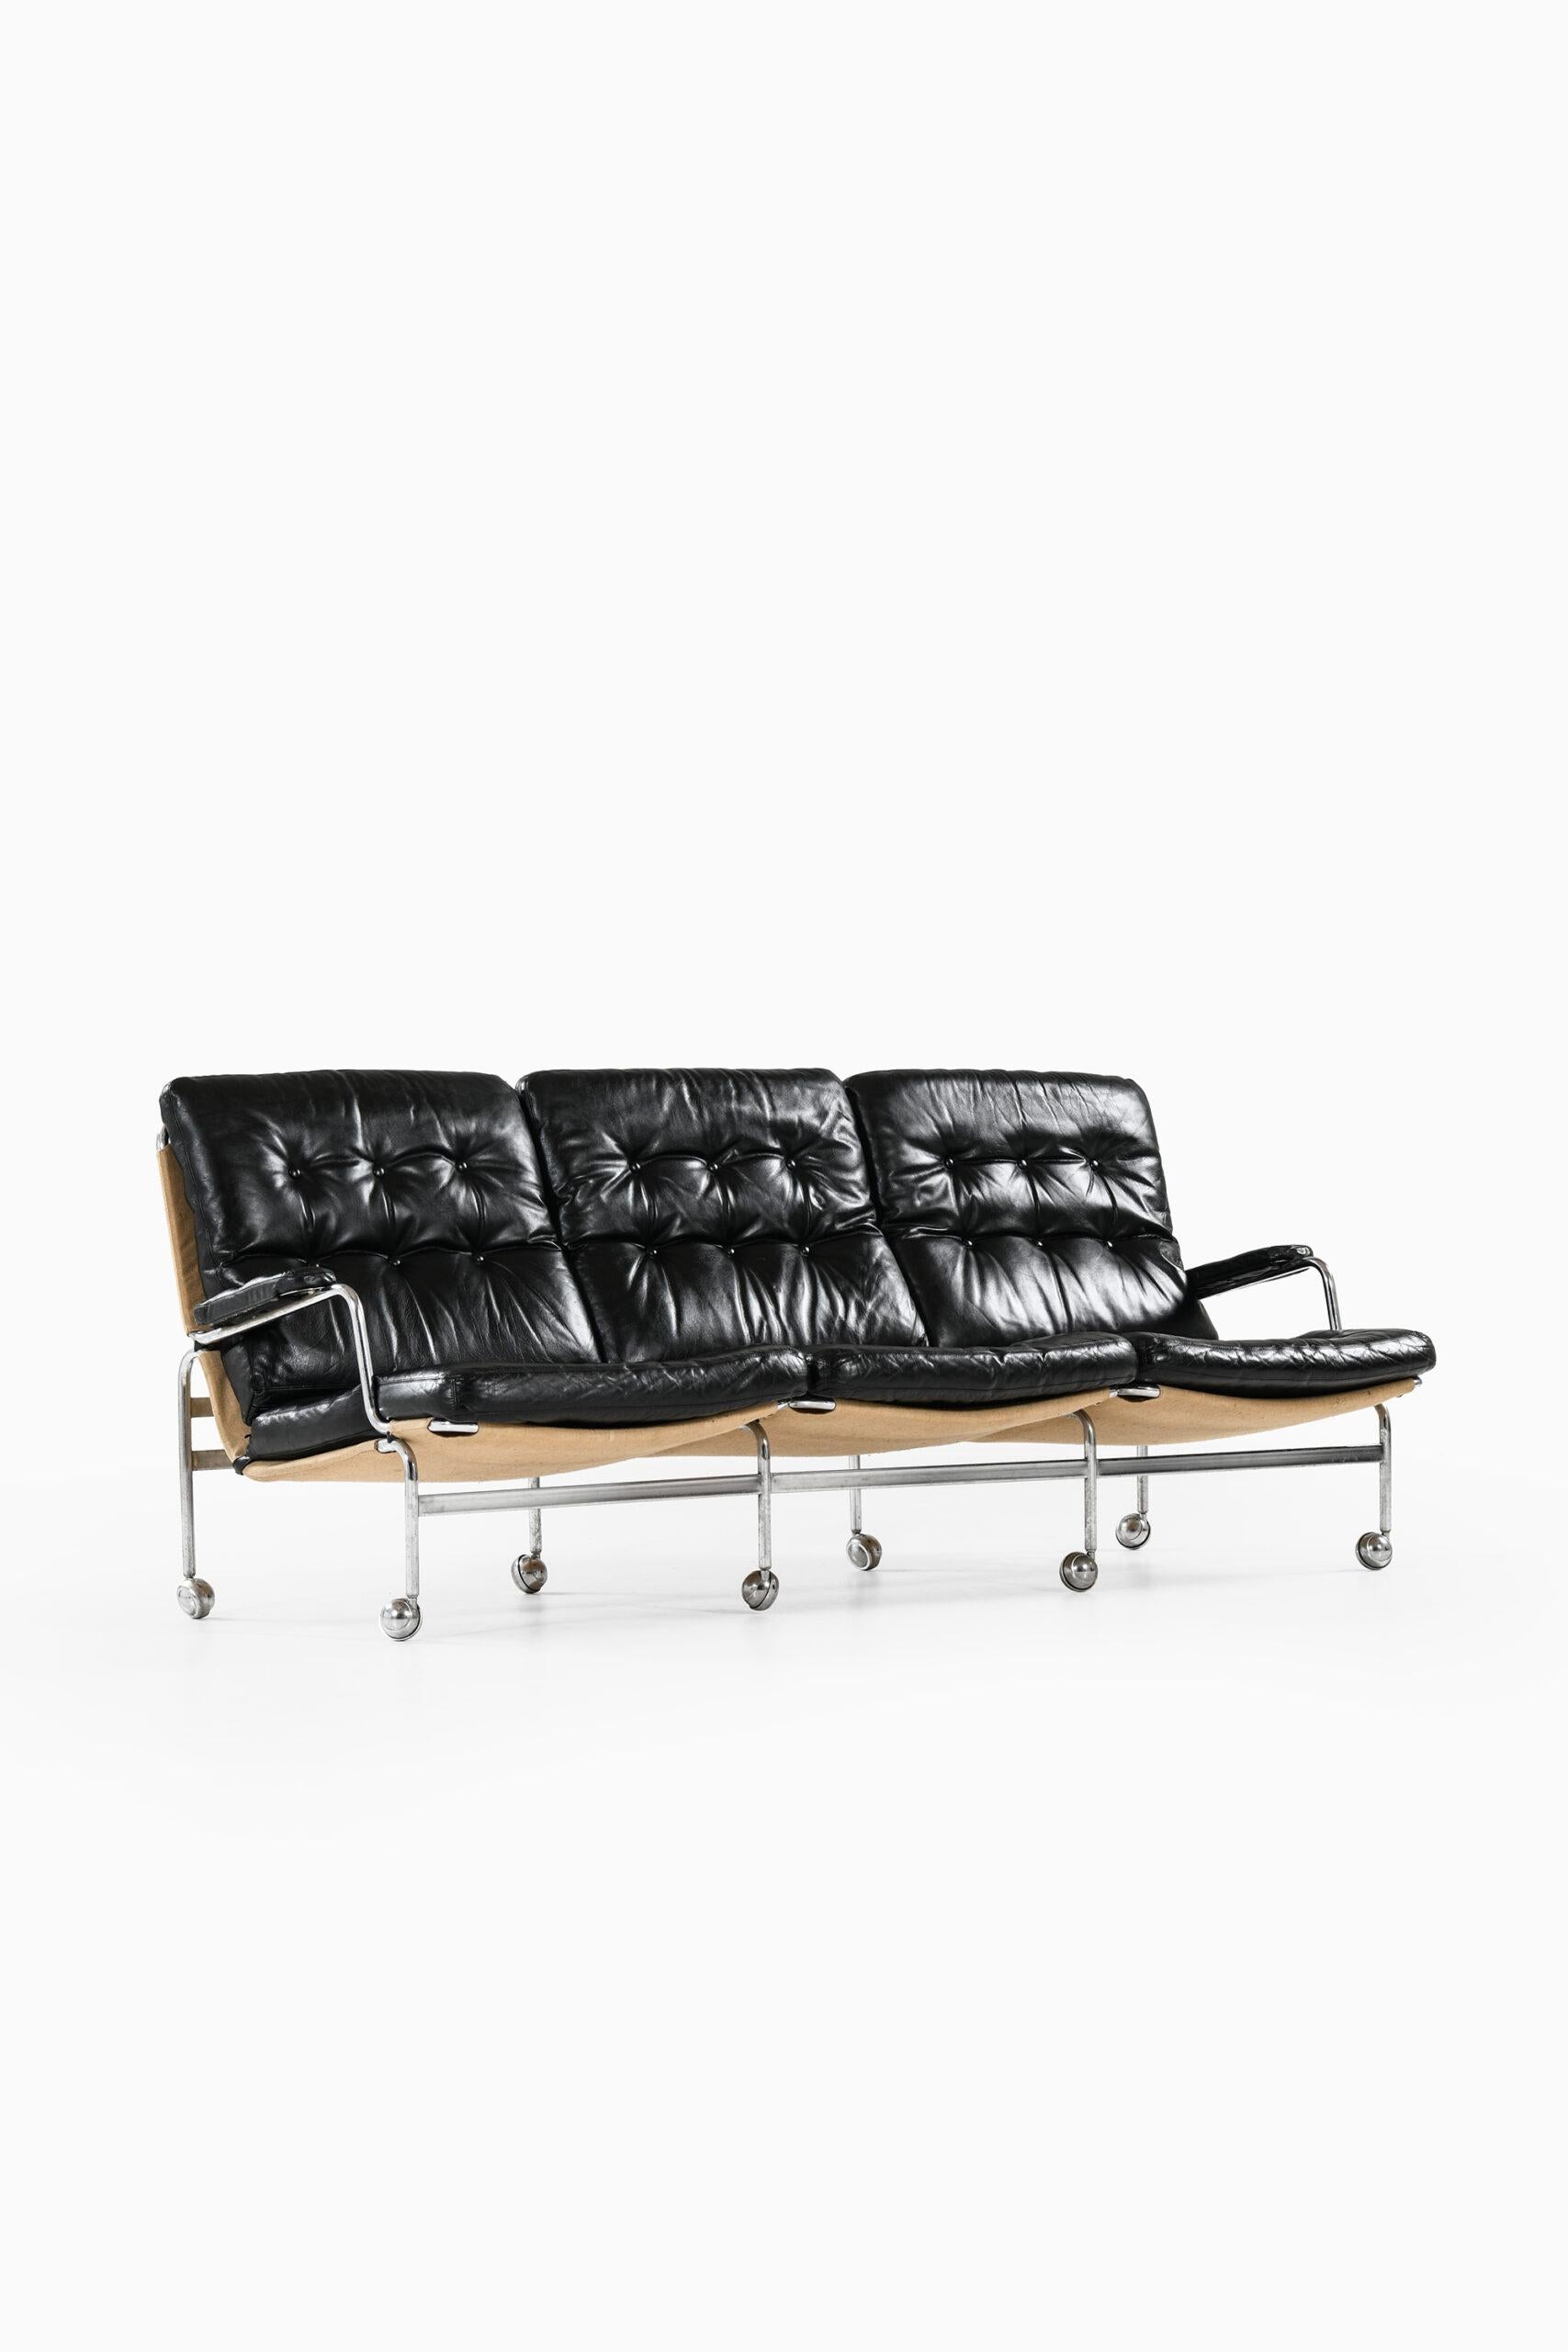 Swedish Bruno Mathsson Sofa Model Karin Produced by DUX in Sweden For Sale